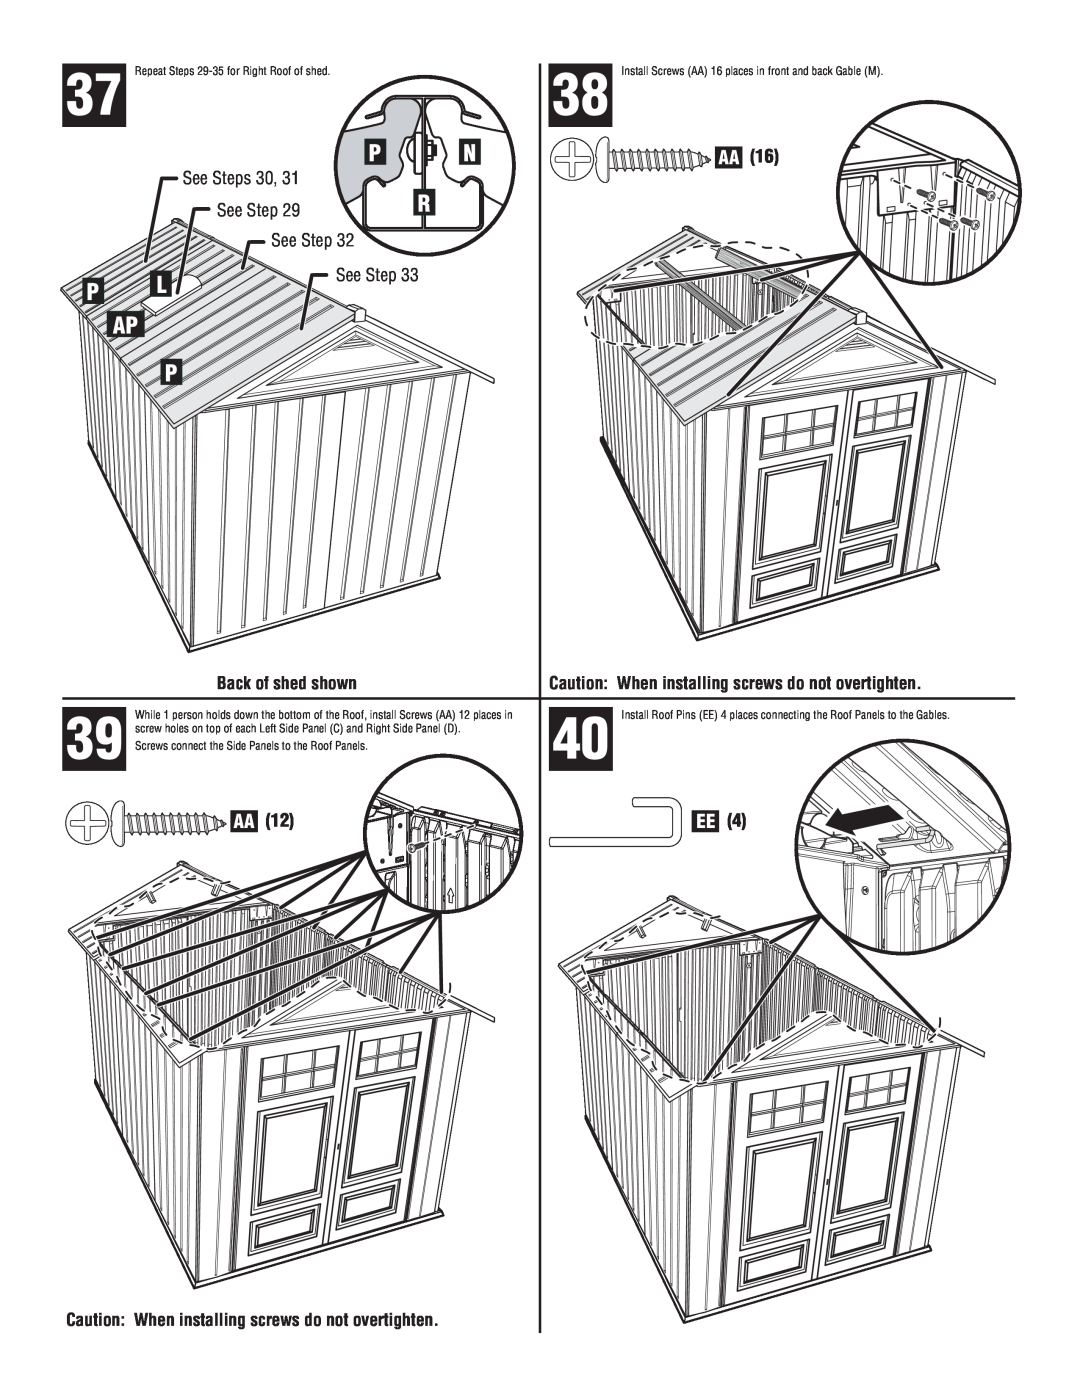 Rubbermaid 1S84 manual Back of shed shown, See Steps, Caution When installing screws do not overtighten 